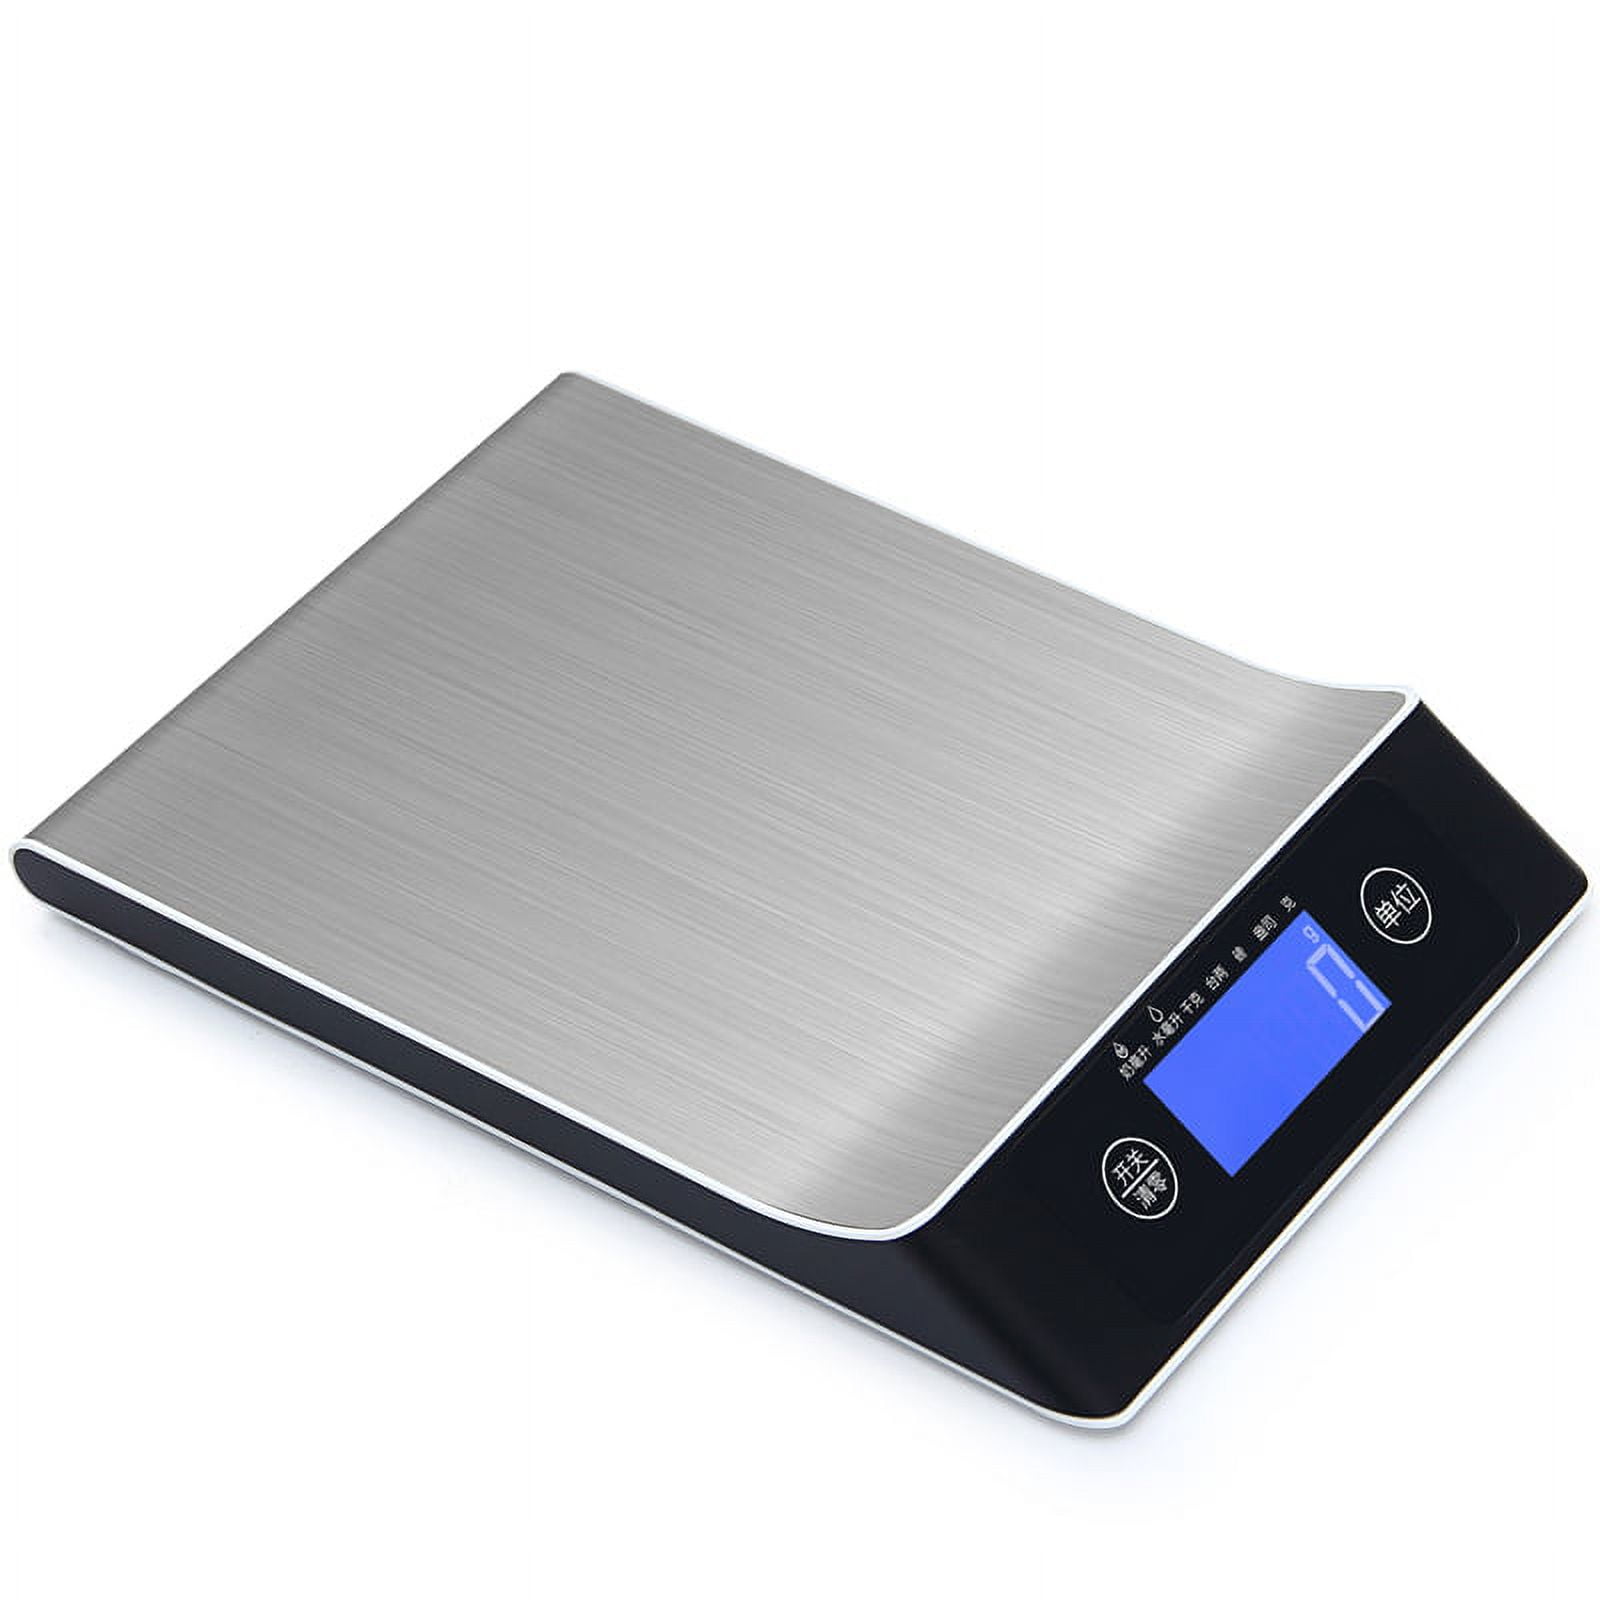 How To Read Digital Scale Grams 